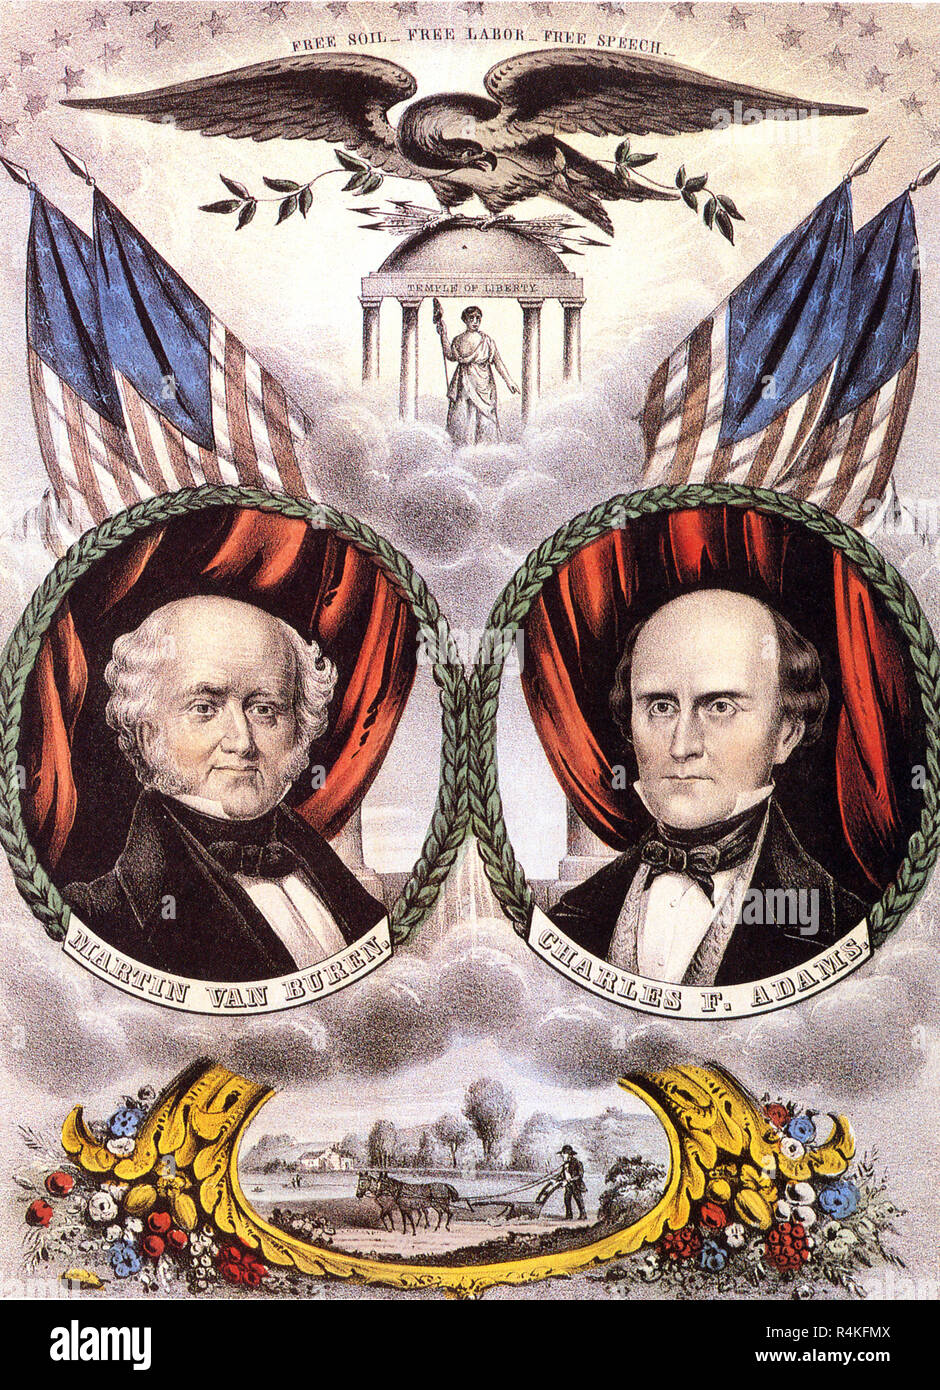 Presidential Ticket, Buren and Adams 1848, Currier, Nathaniel & Ives, Jam. Stock Photo